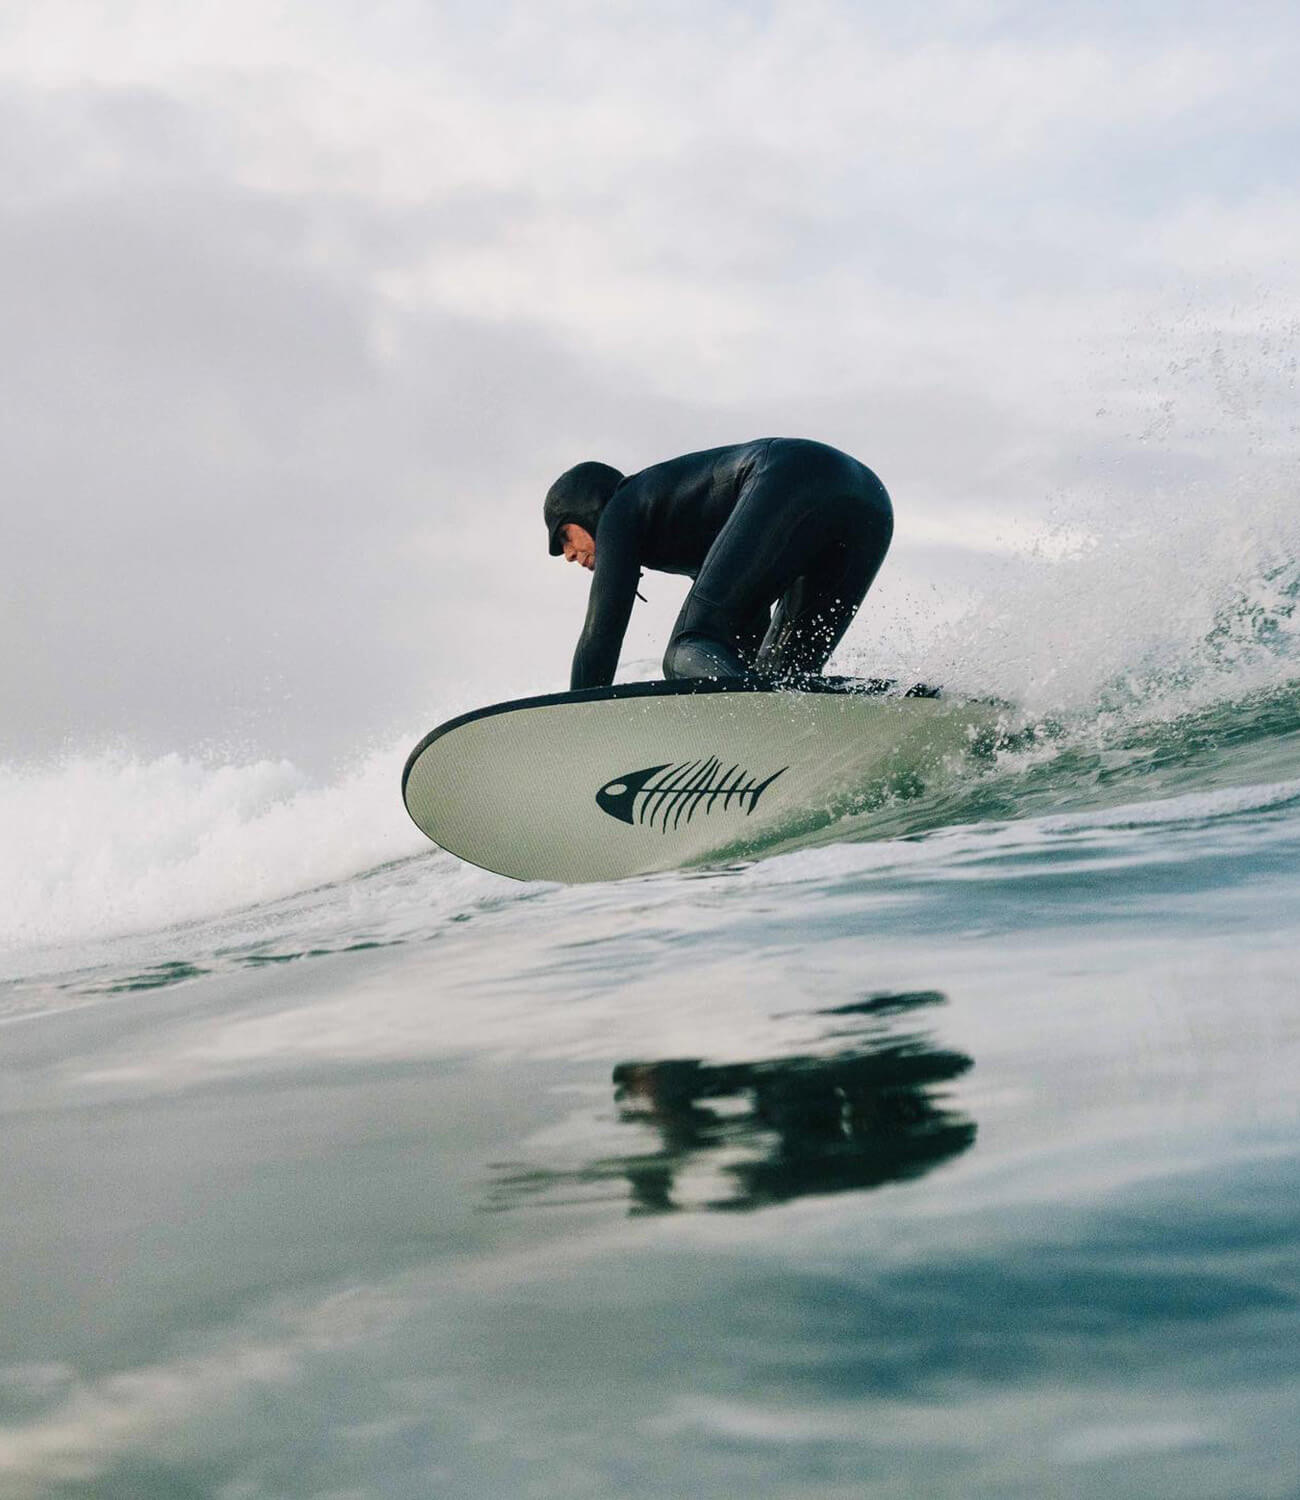 Soft Surfboards for Beginners and Intermediate Surfers